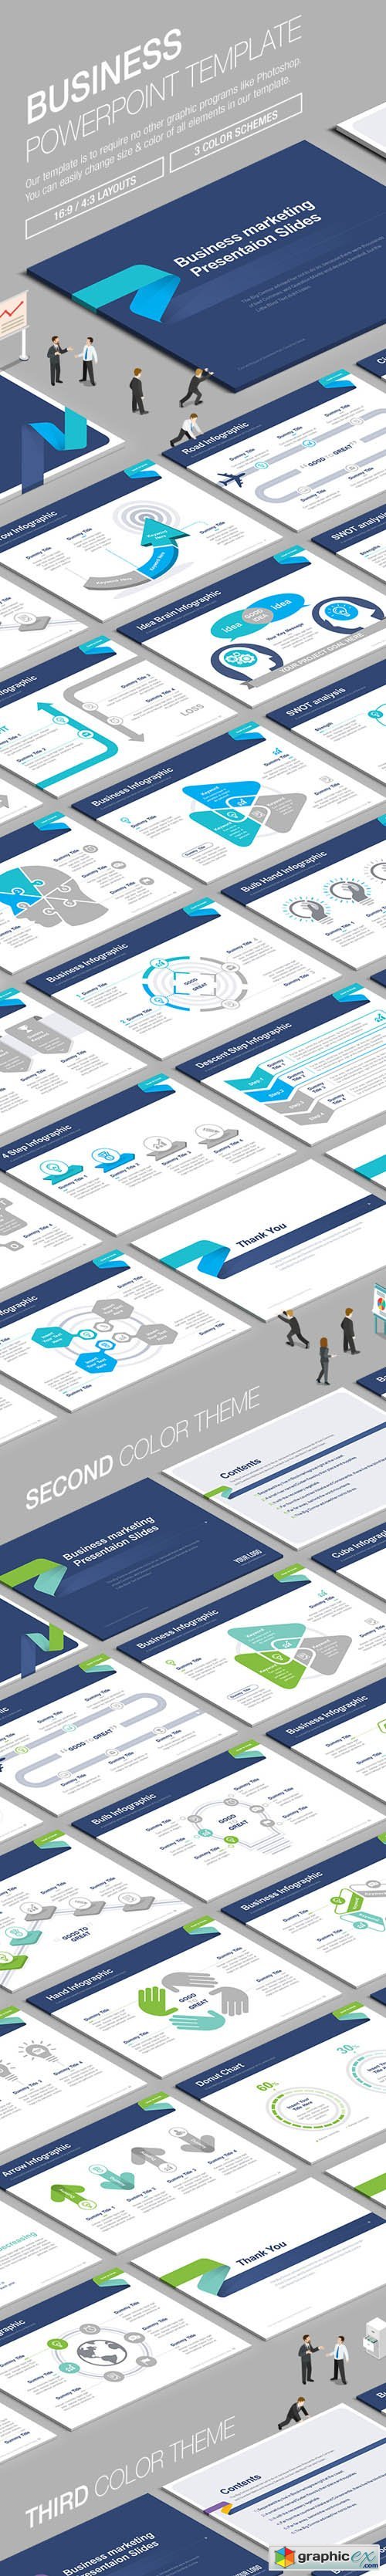 Business Powerpoint Template 006